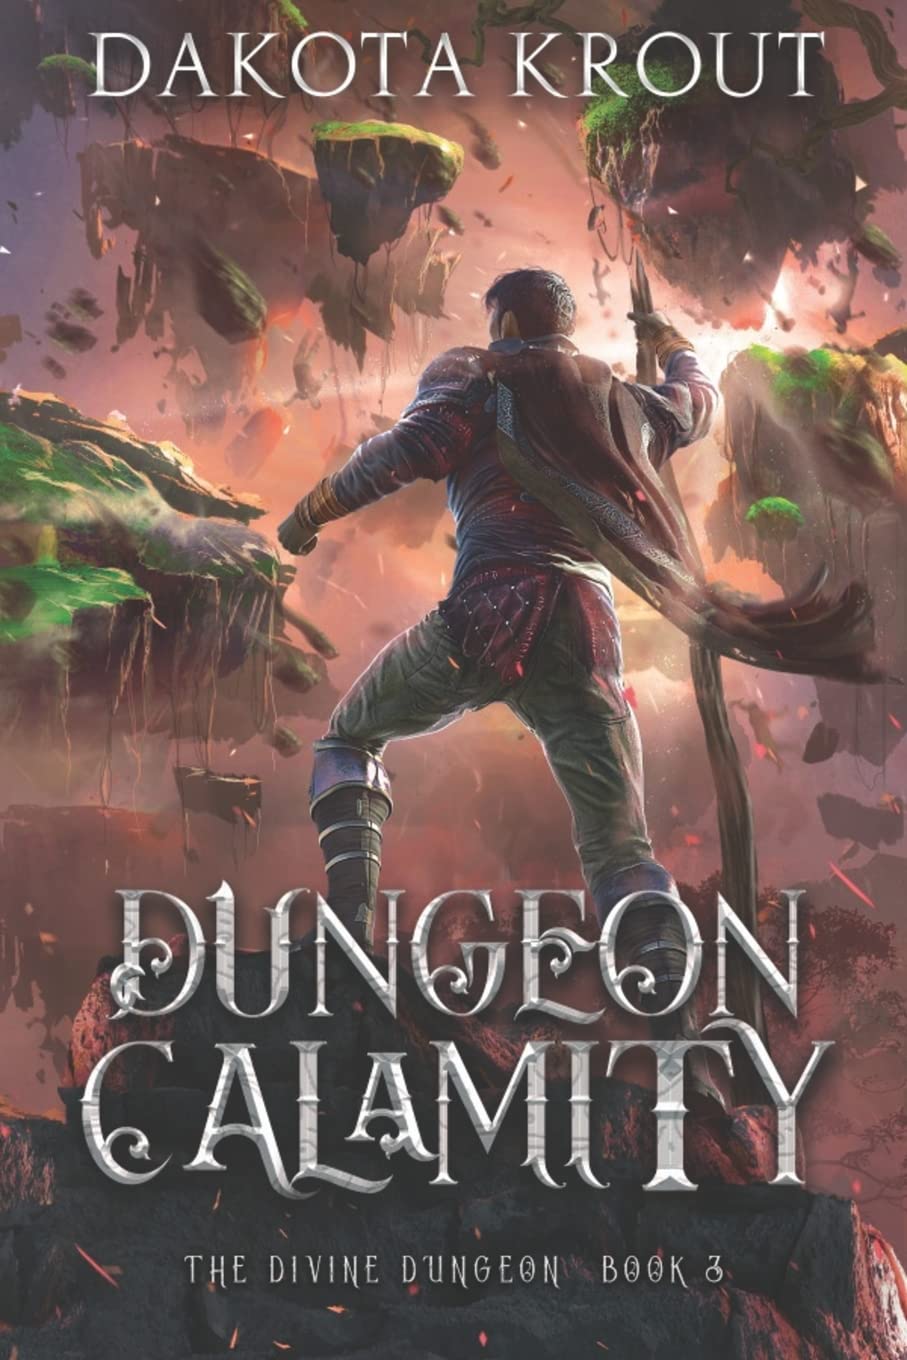 Dakota Krout: Dungeon Calamity (2017, Independently published)